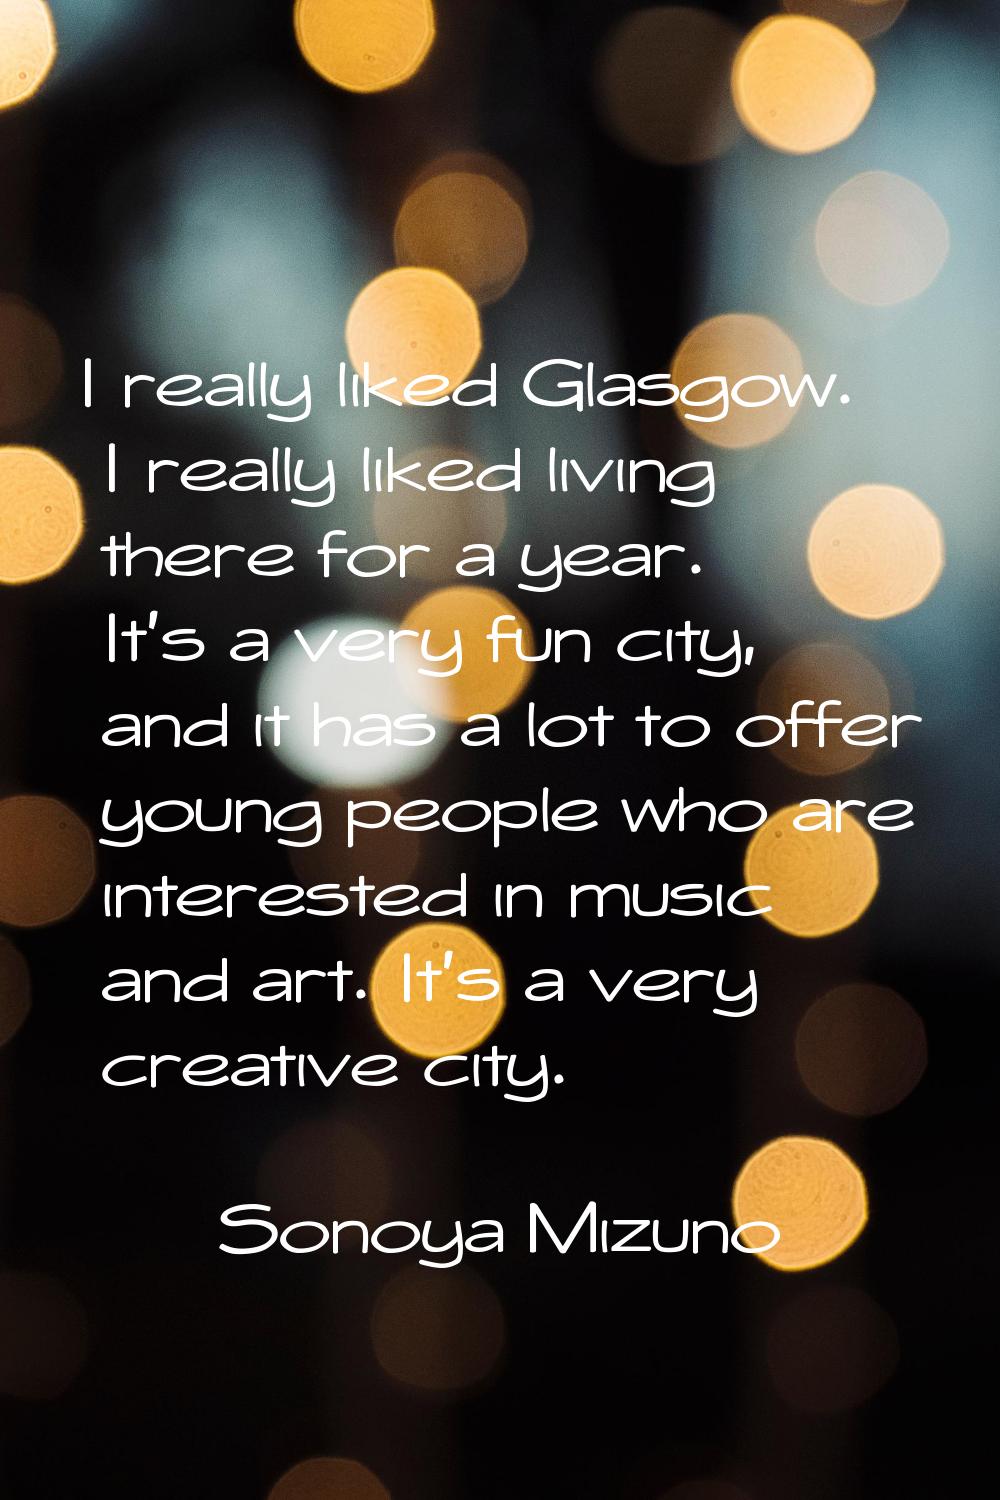 I really liked Glasgow. I really liked living there for a year. It's a very fun city, and it has a 